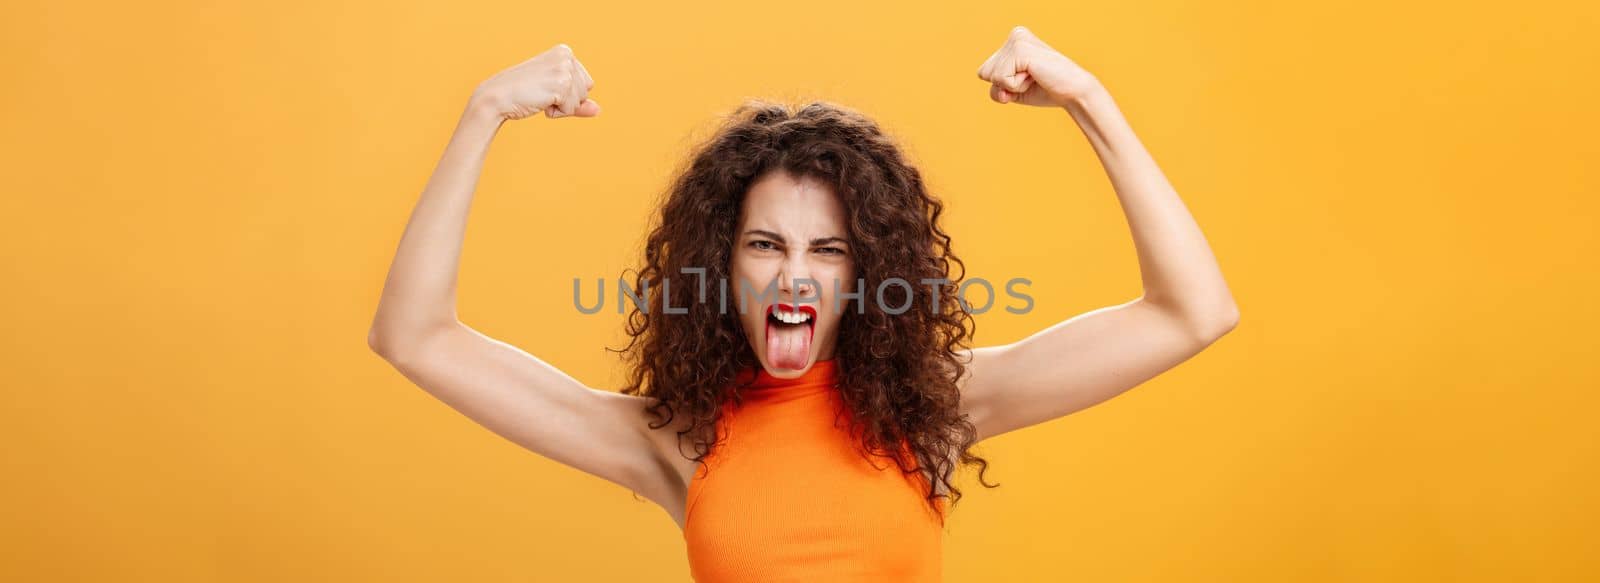 Waist-up shot of cool and daring caucasian female in orange top with tattoo on arm frowning making funny face sticking out tongue raising hands showing muscles feeling power and strengths. Copy space